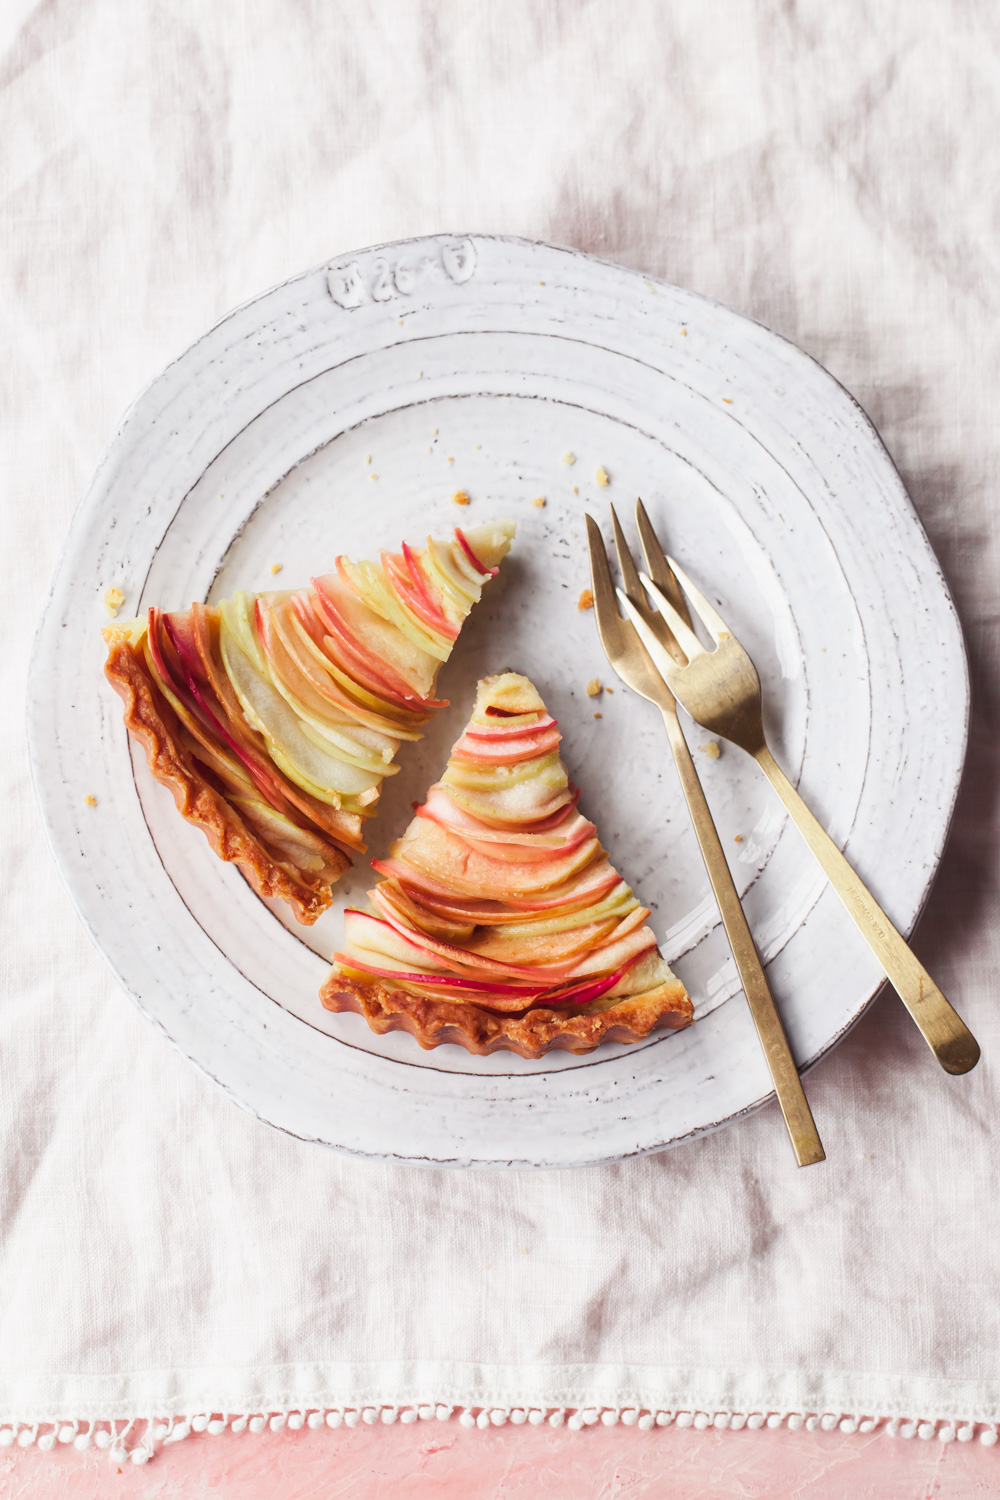 French apple tart slices with almond frangipane.